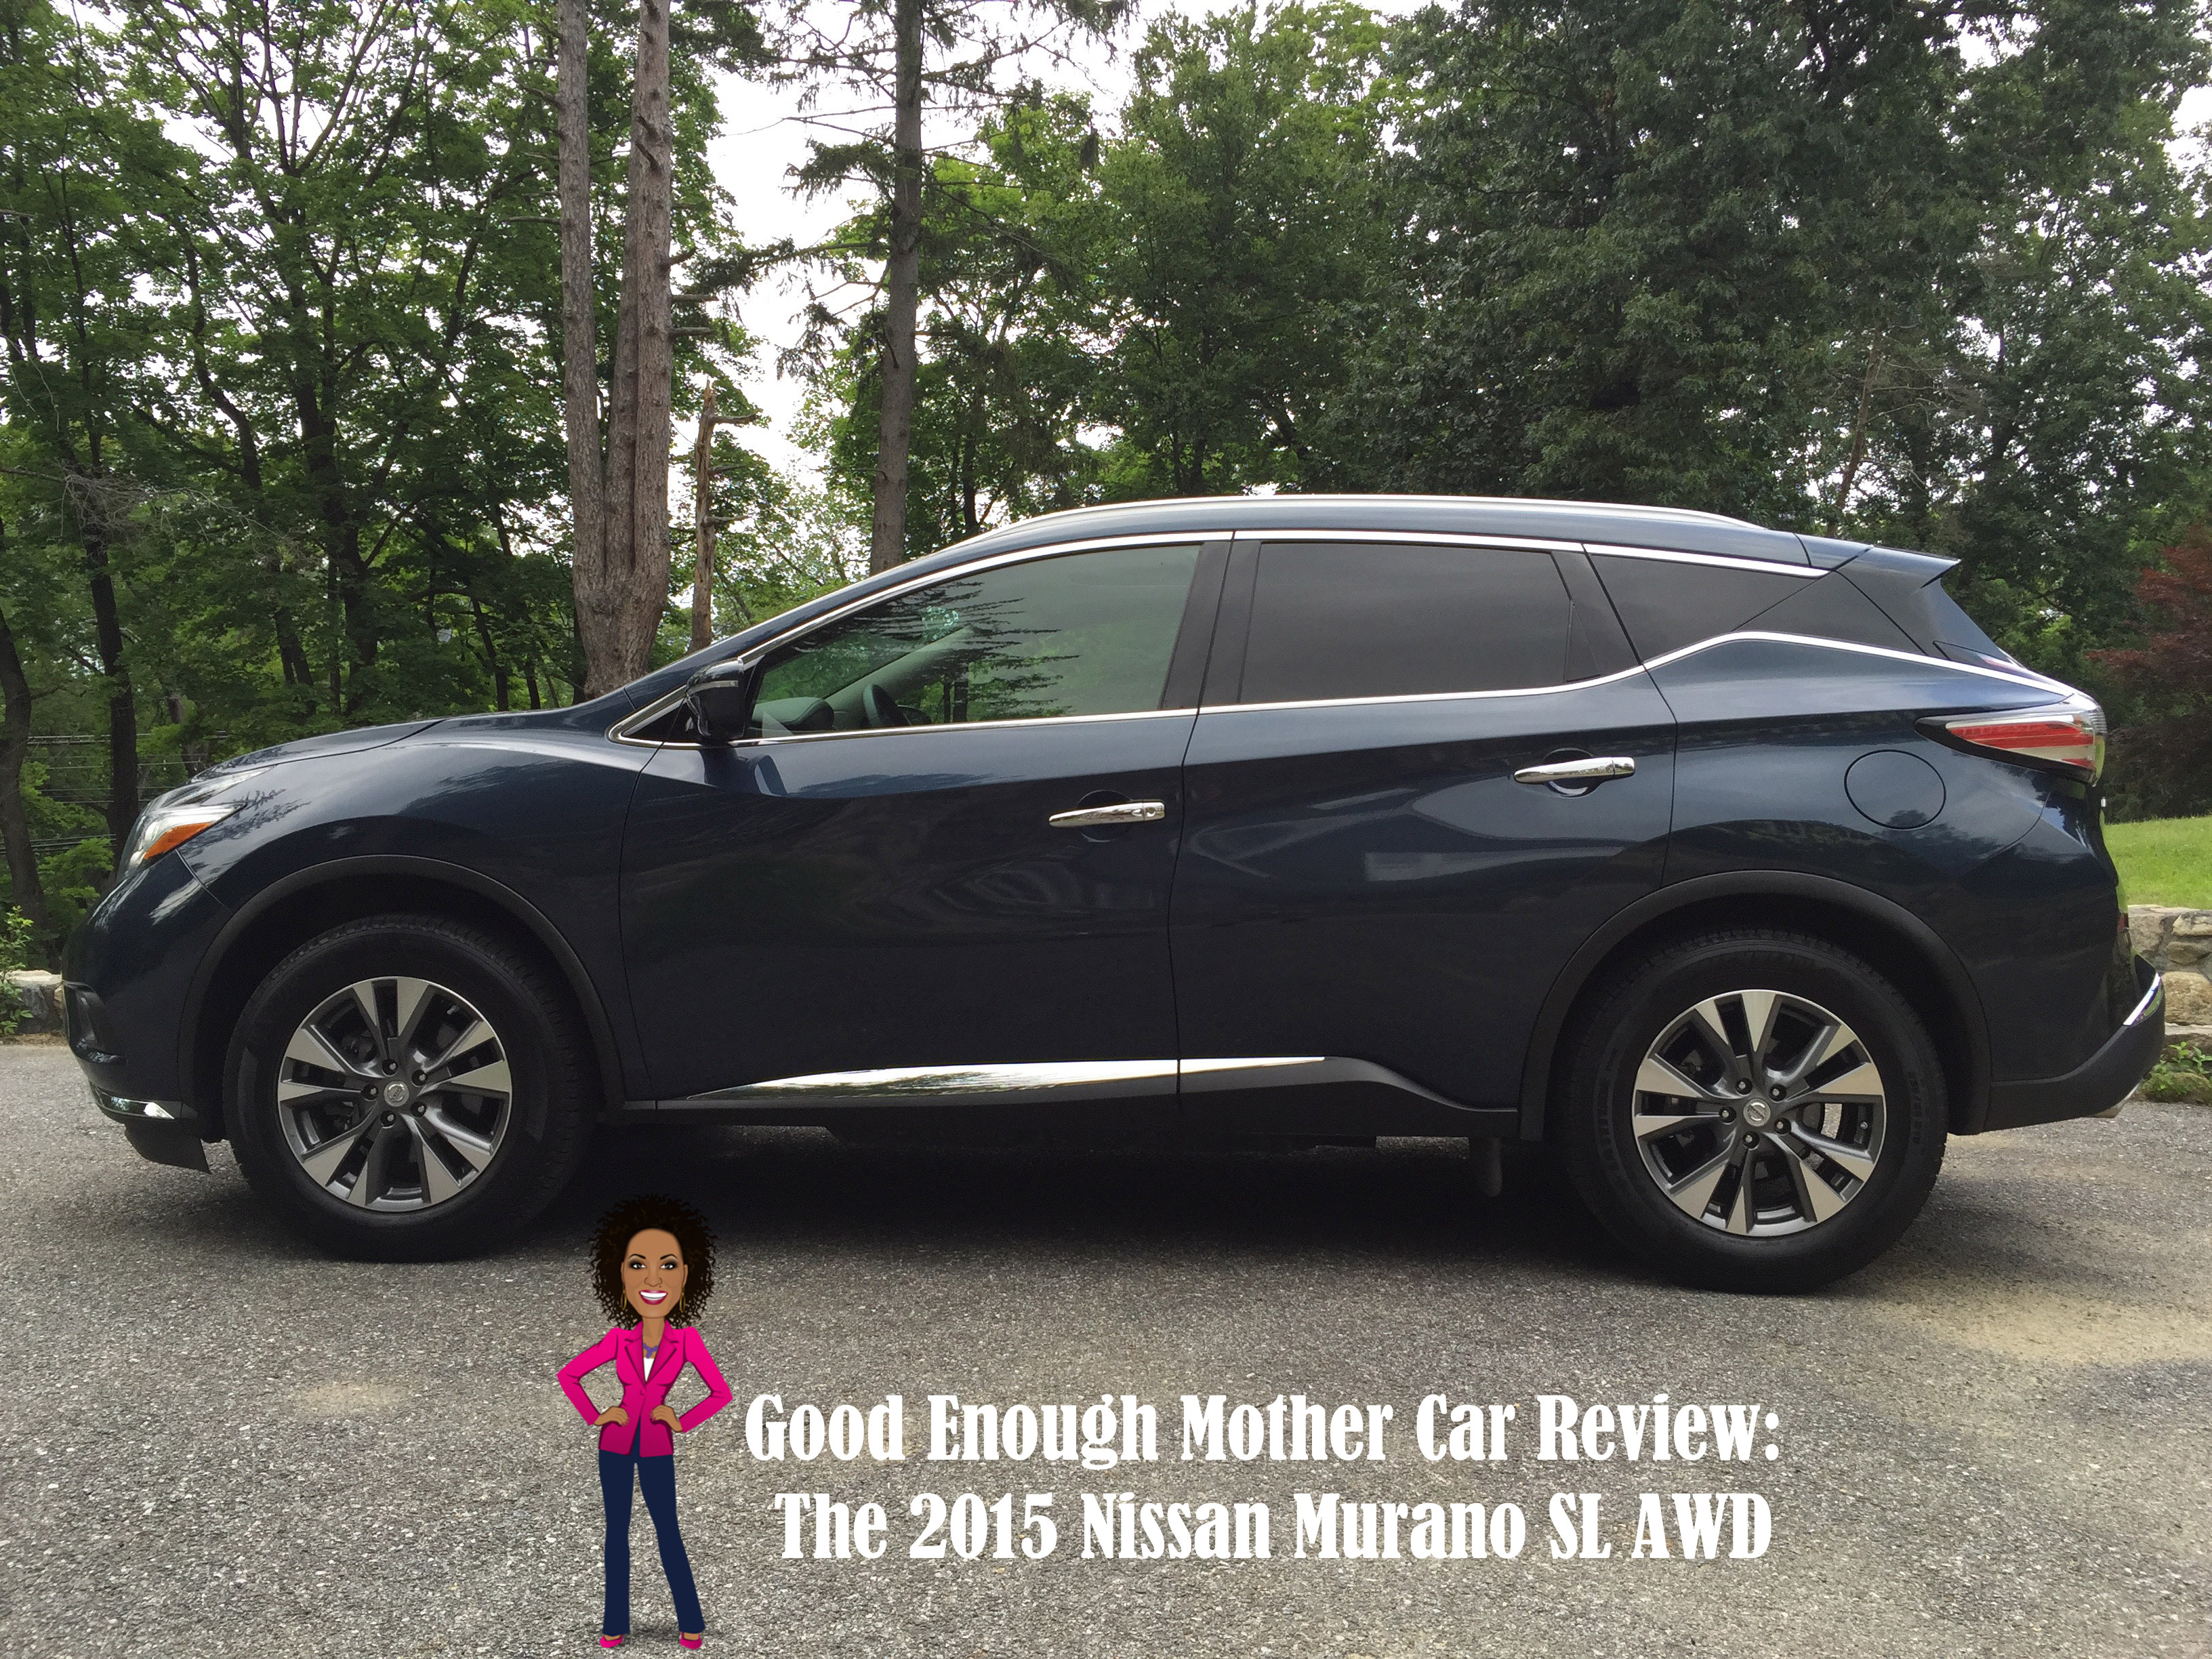 Good Enough Mother Car Review: The 2015 Nissan Murano SL AWD (VIDEO)